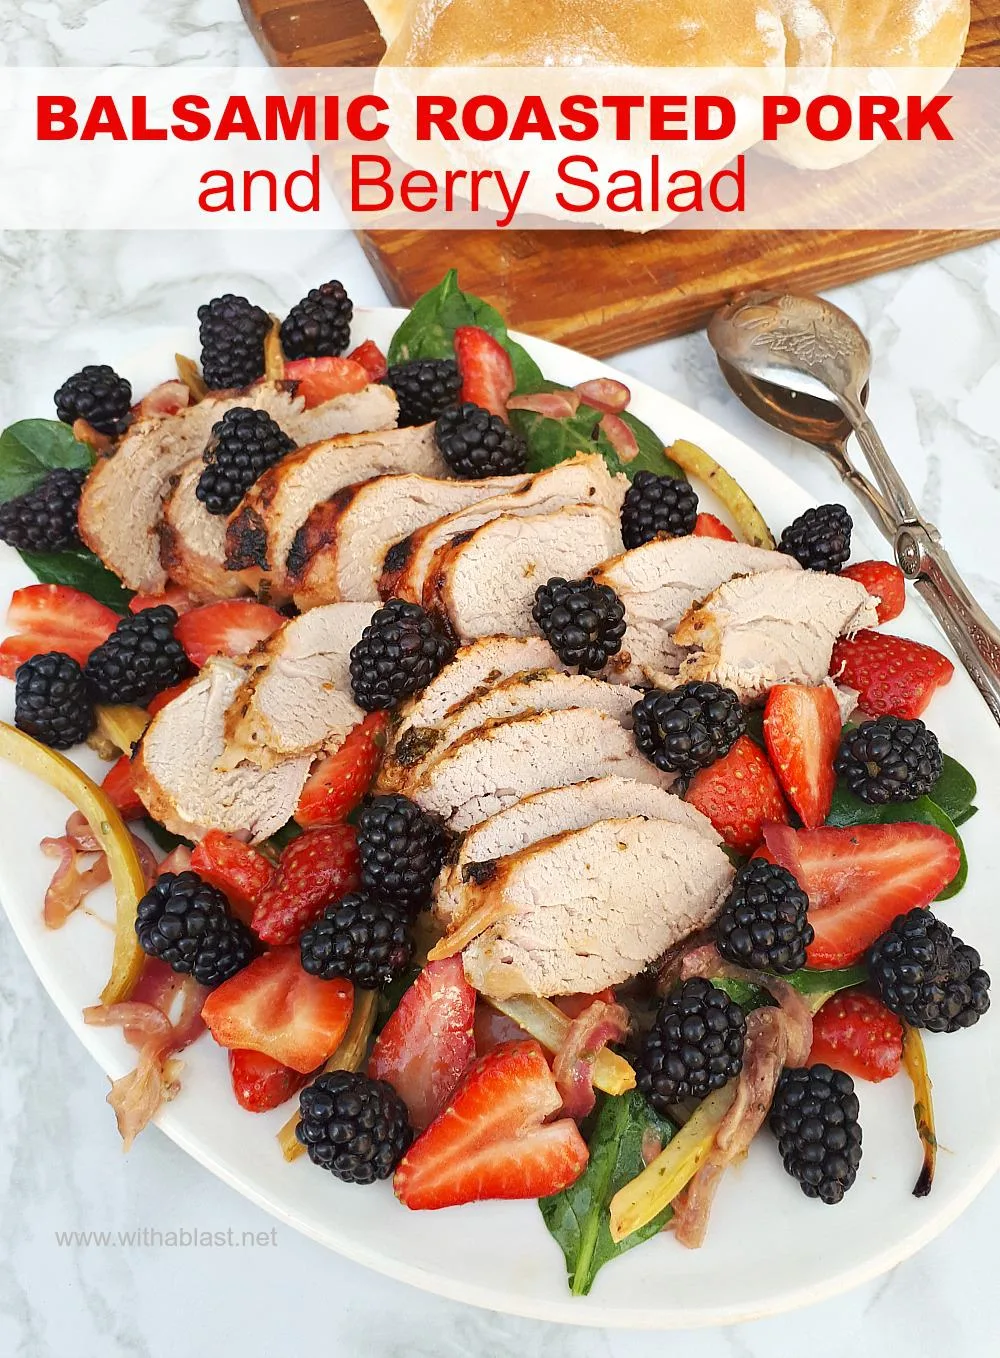 Balsamic Roasted Pork And Berry Salad is a healthy lunch or light dinner - NO dressing is required as all the ingredients are so juicy ! #PorkSalad #FallSalad #BerrySalad #porkrecipes #healthyeating